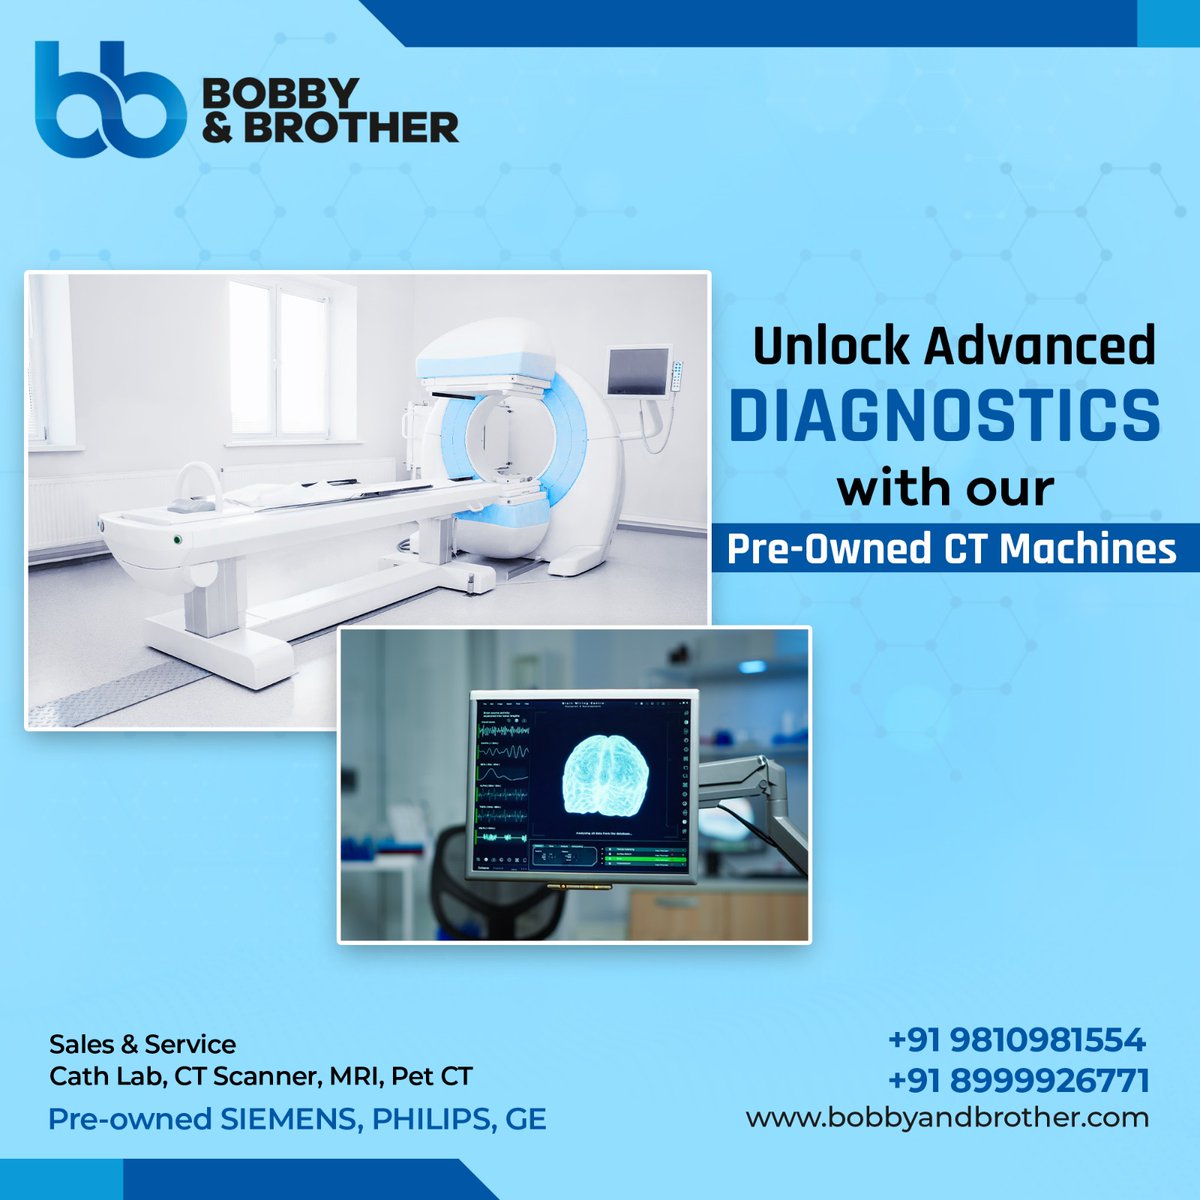 Explore top-quality imaging solutions with our pre-owned CT scan machines, delivering precision diagnostics and exceptional value for healthcare facilities.

#BobbyAndBrother #RefurbishedEquipment #CtScan #CtScanMachine #HealthcareTechnology #RefurbishedEquipment #India